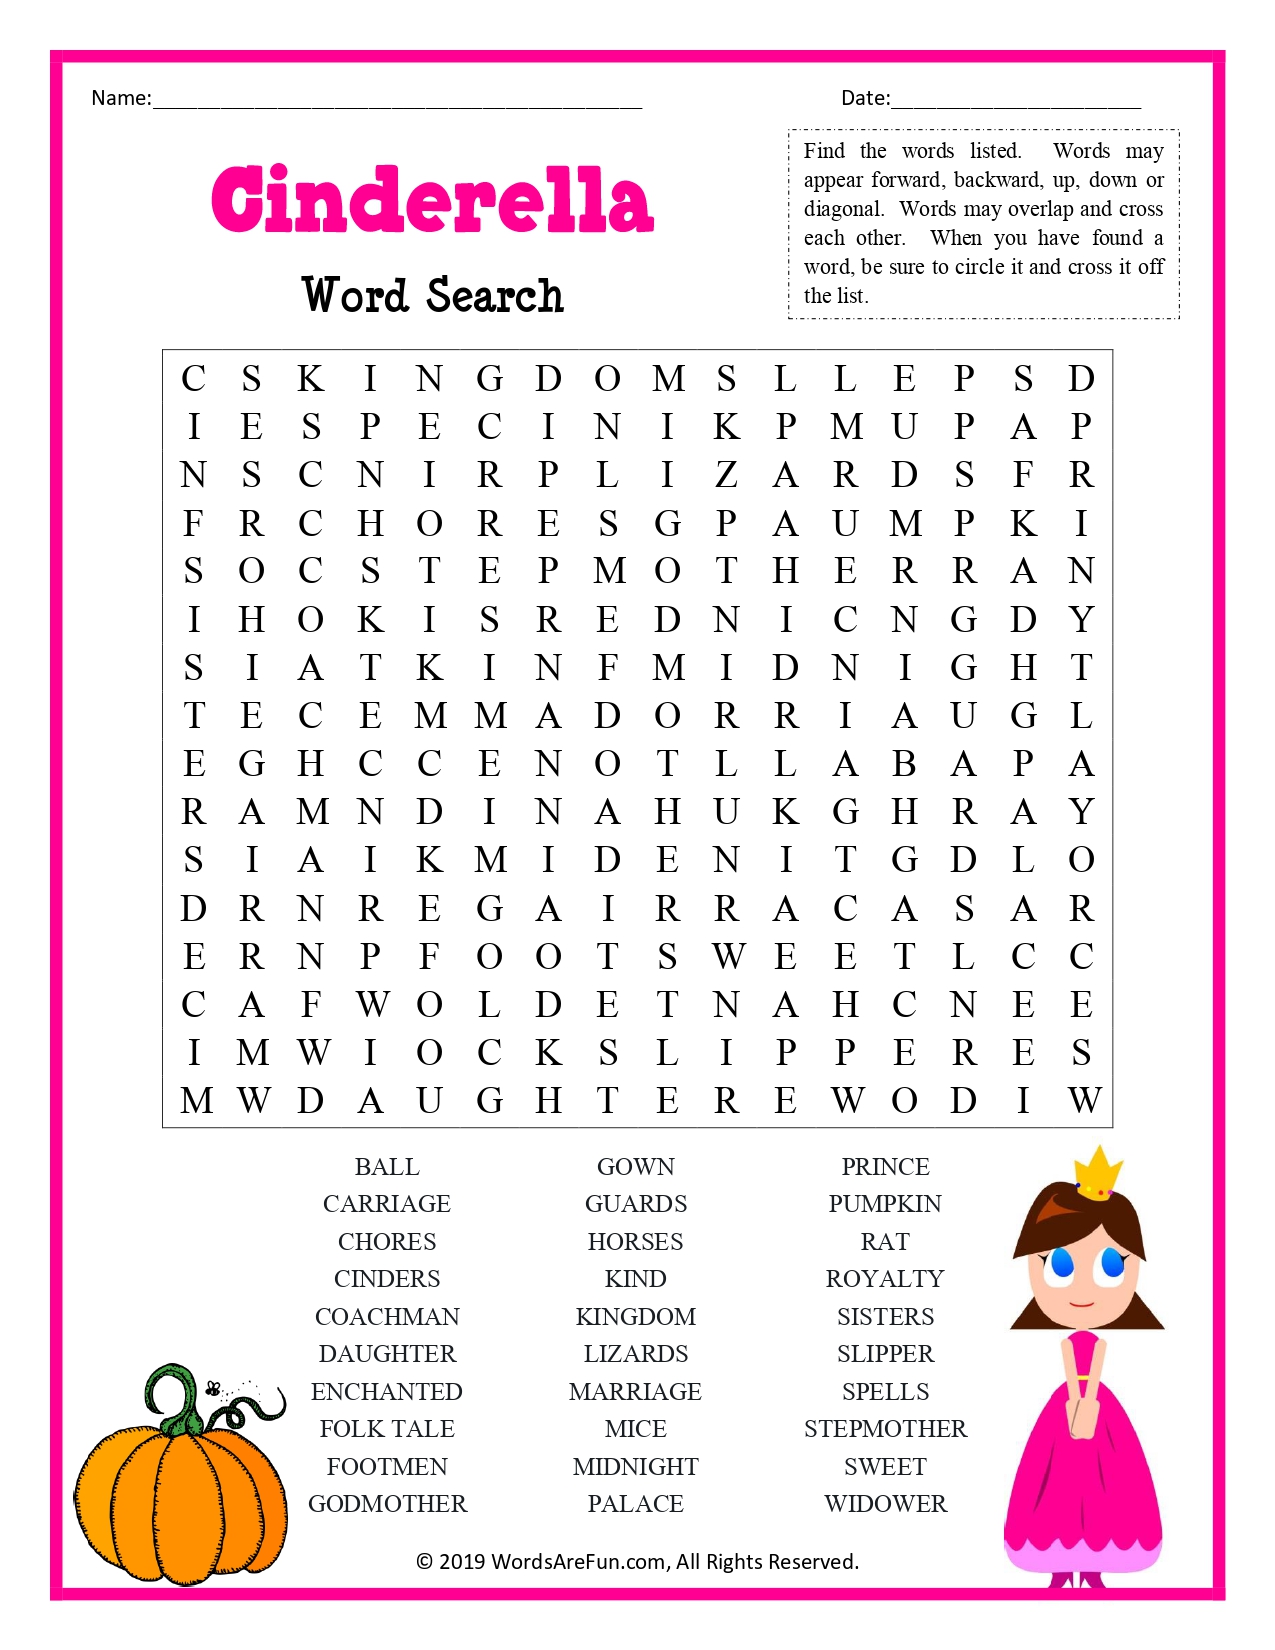 Cinderella Word Search For Kids